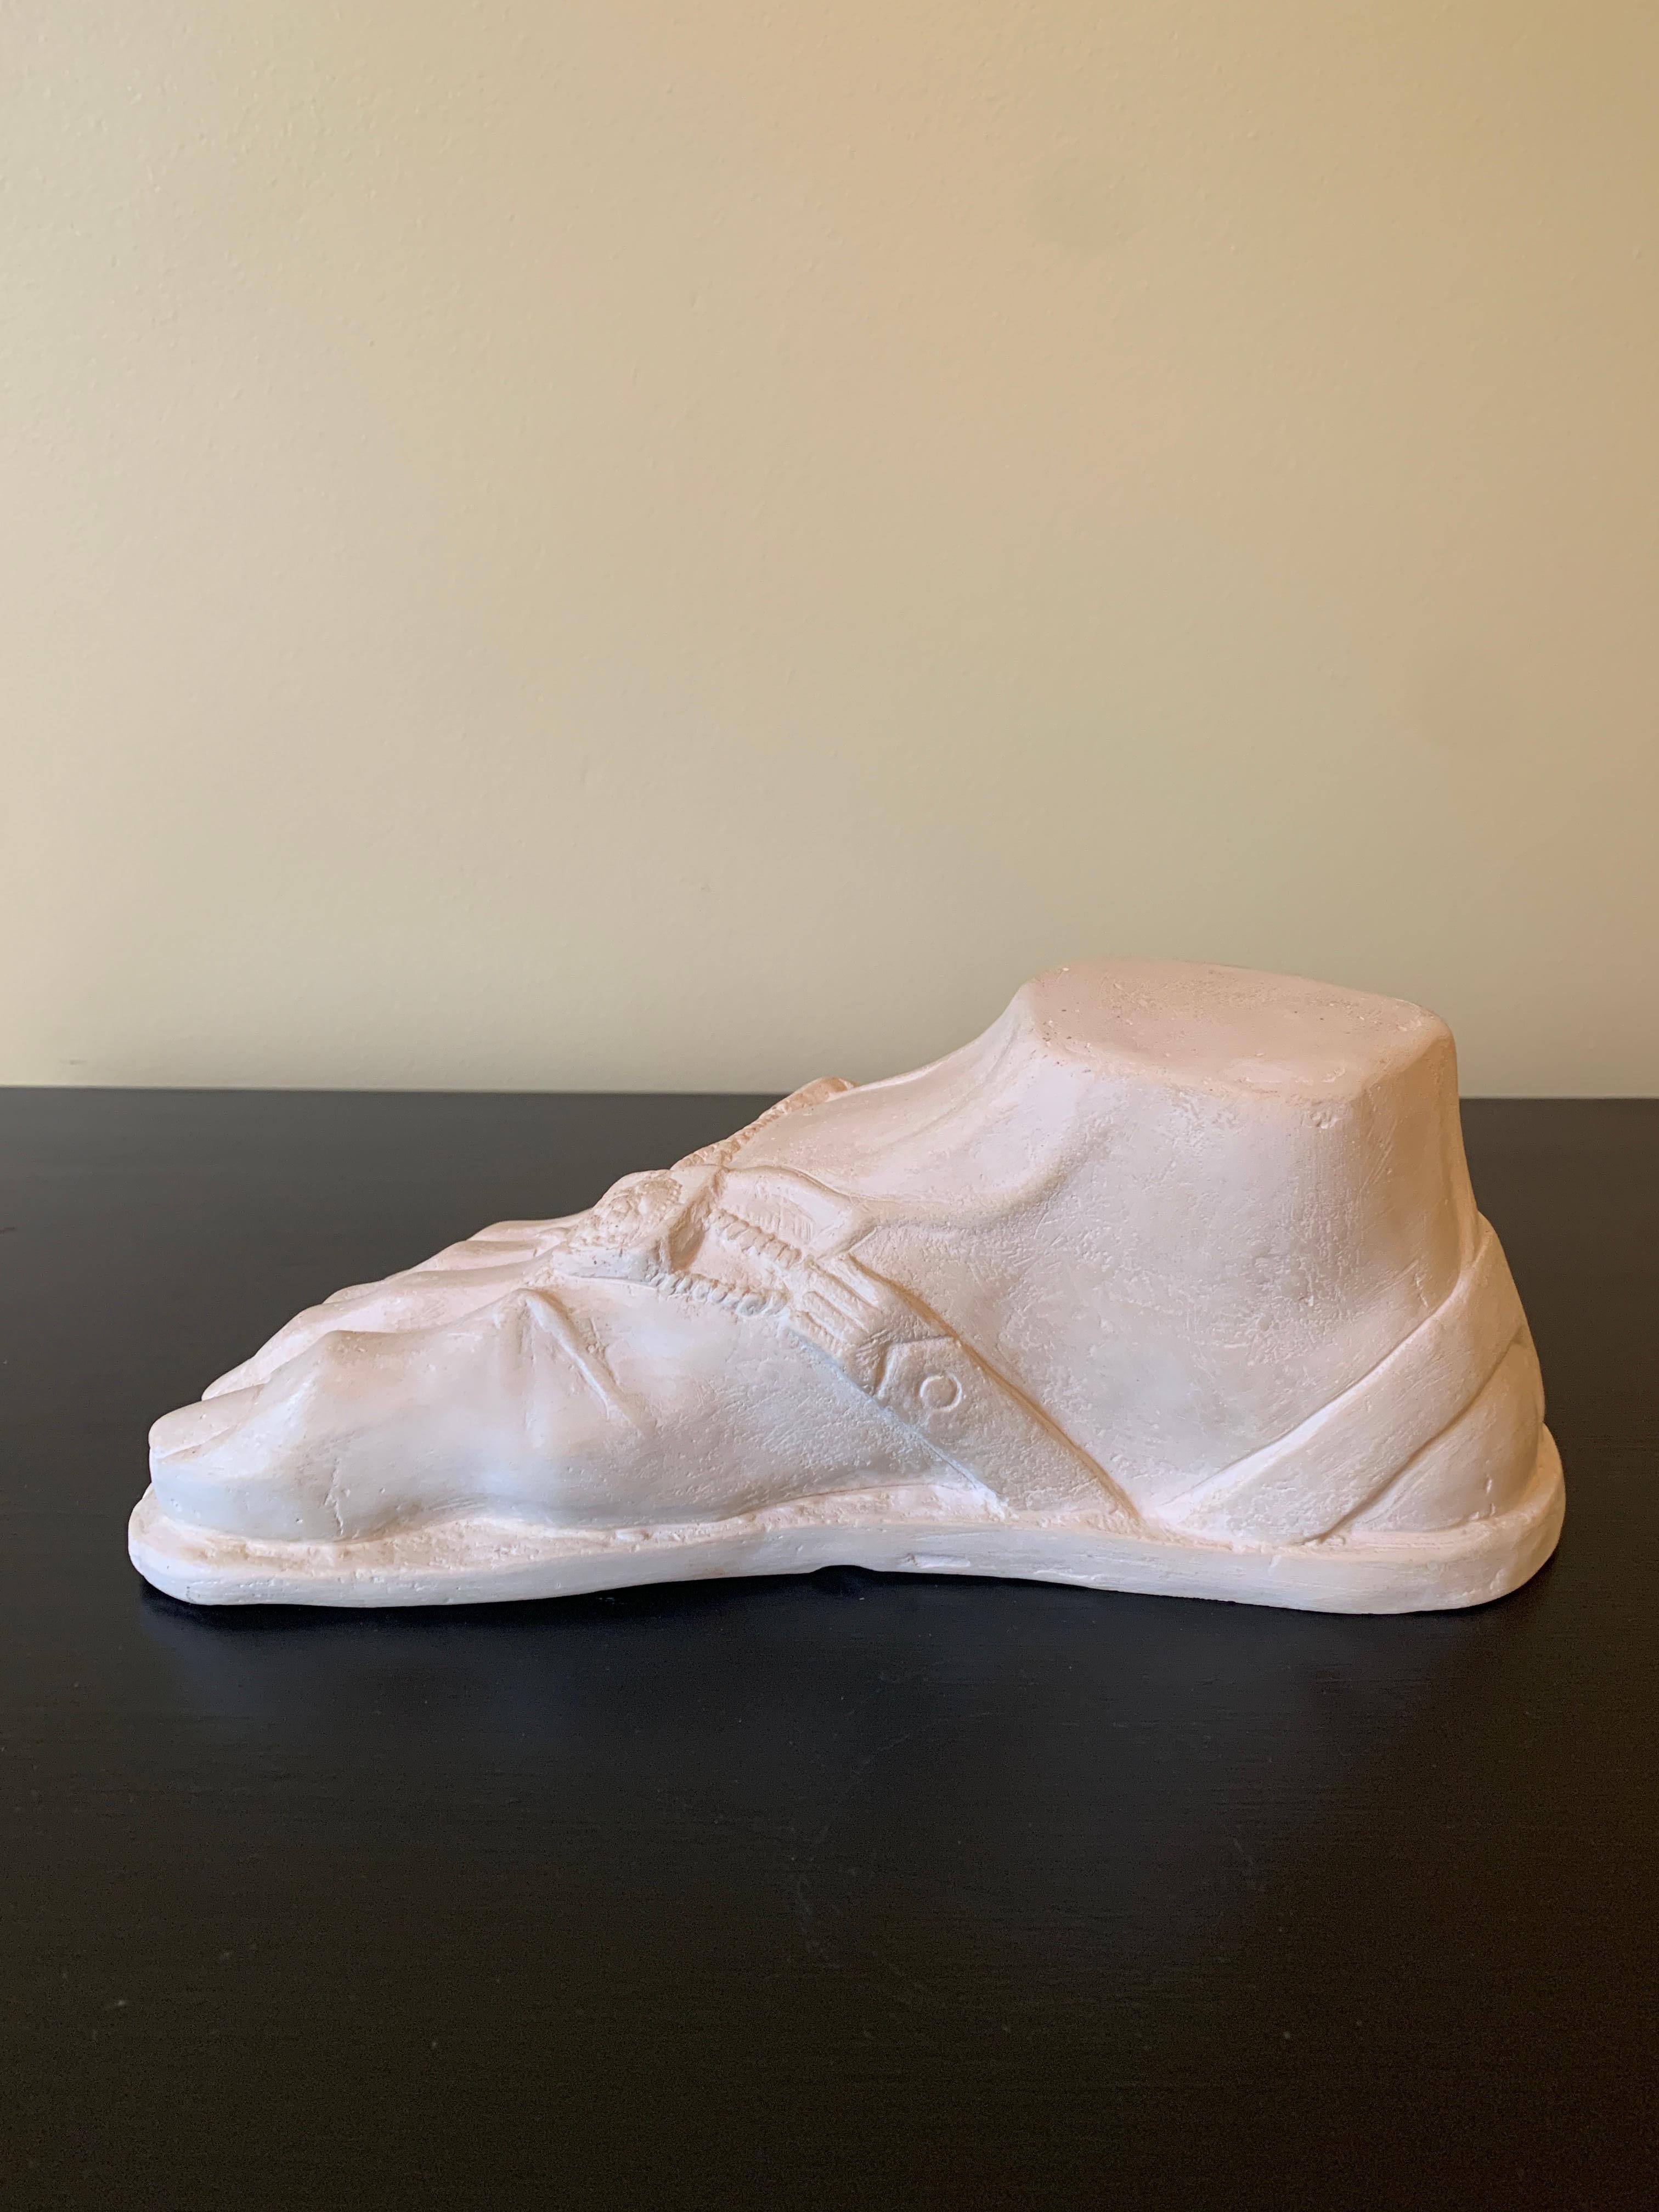 Grand Tour Style Greek or Roman Plaster Foot Sculpture For Sale 2